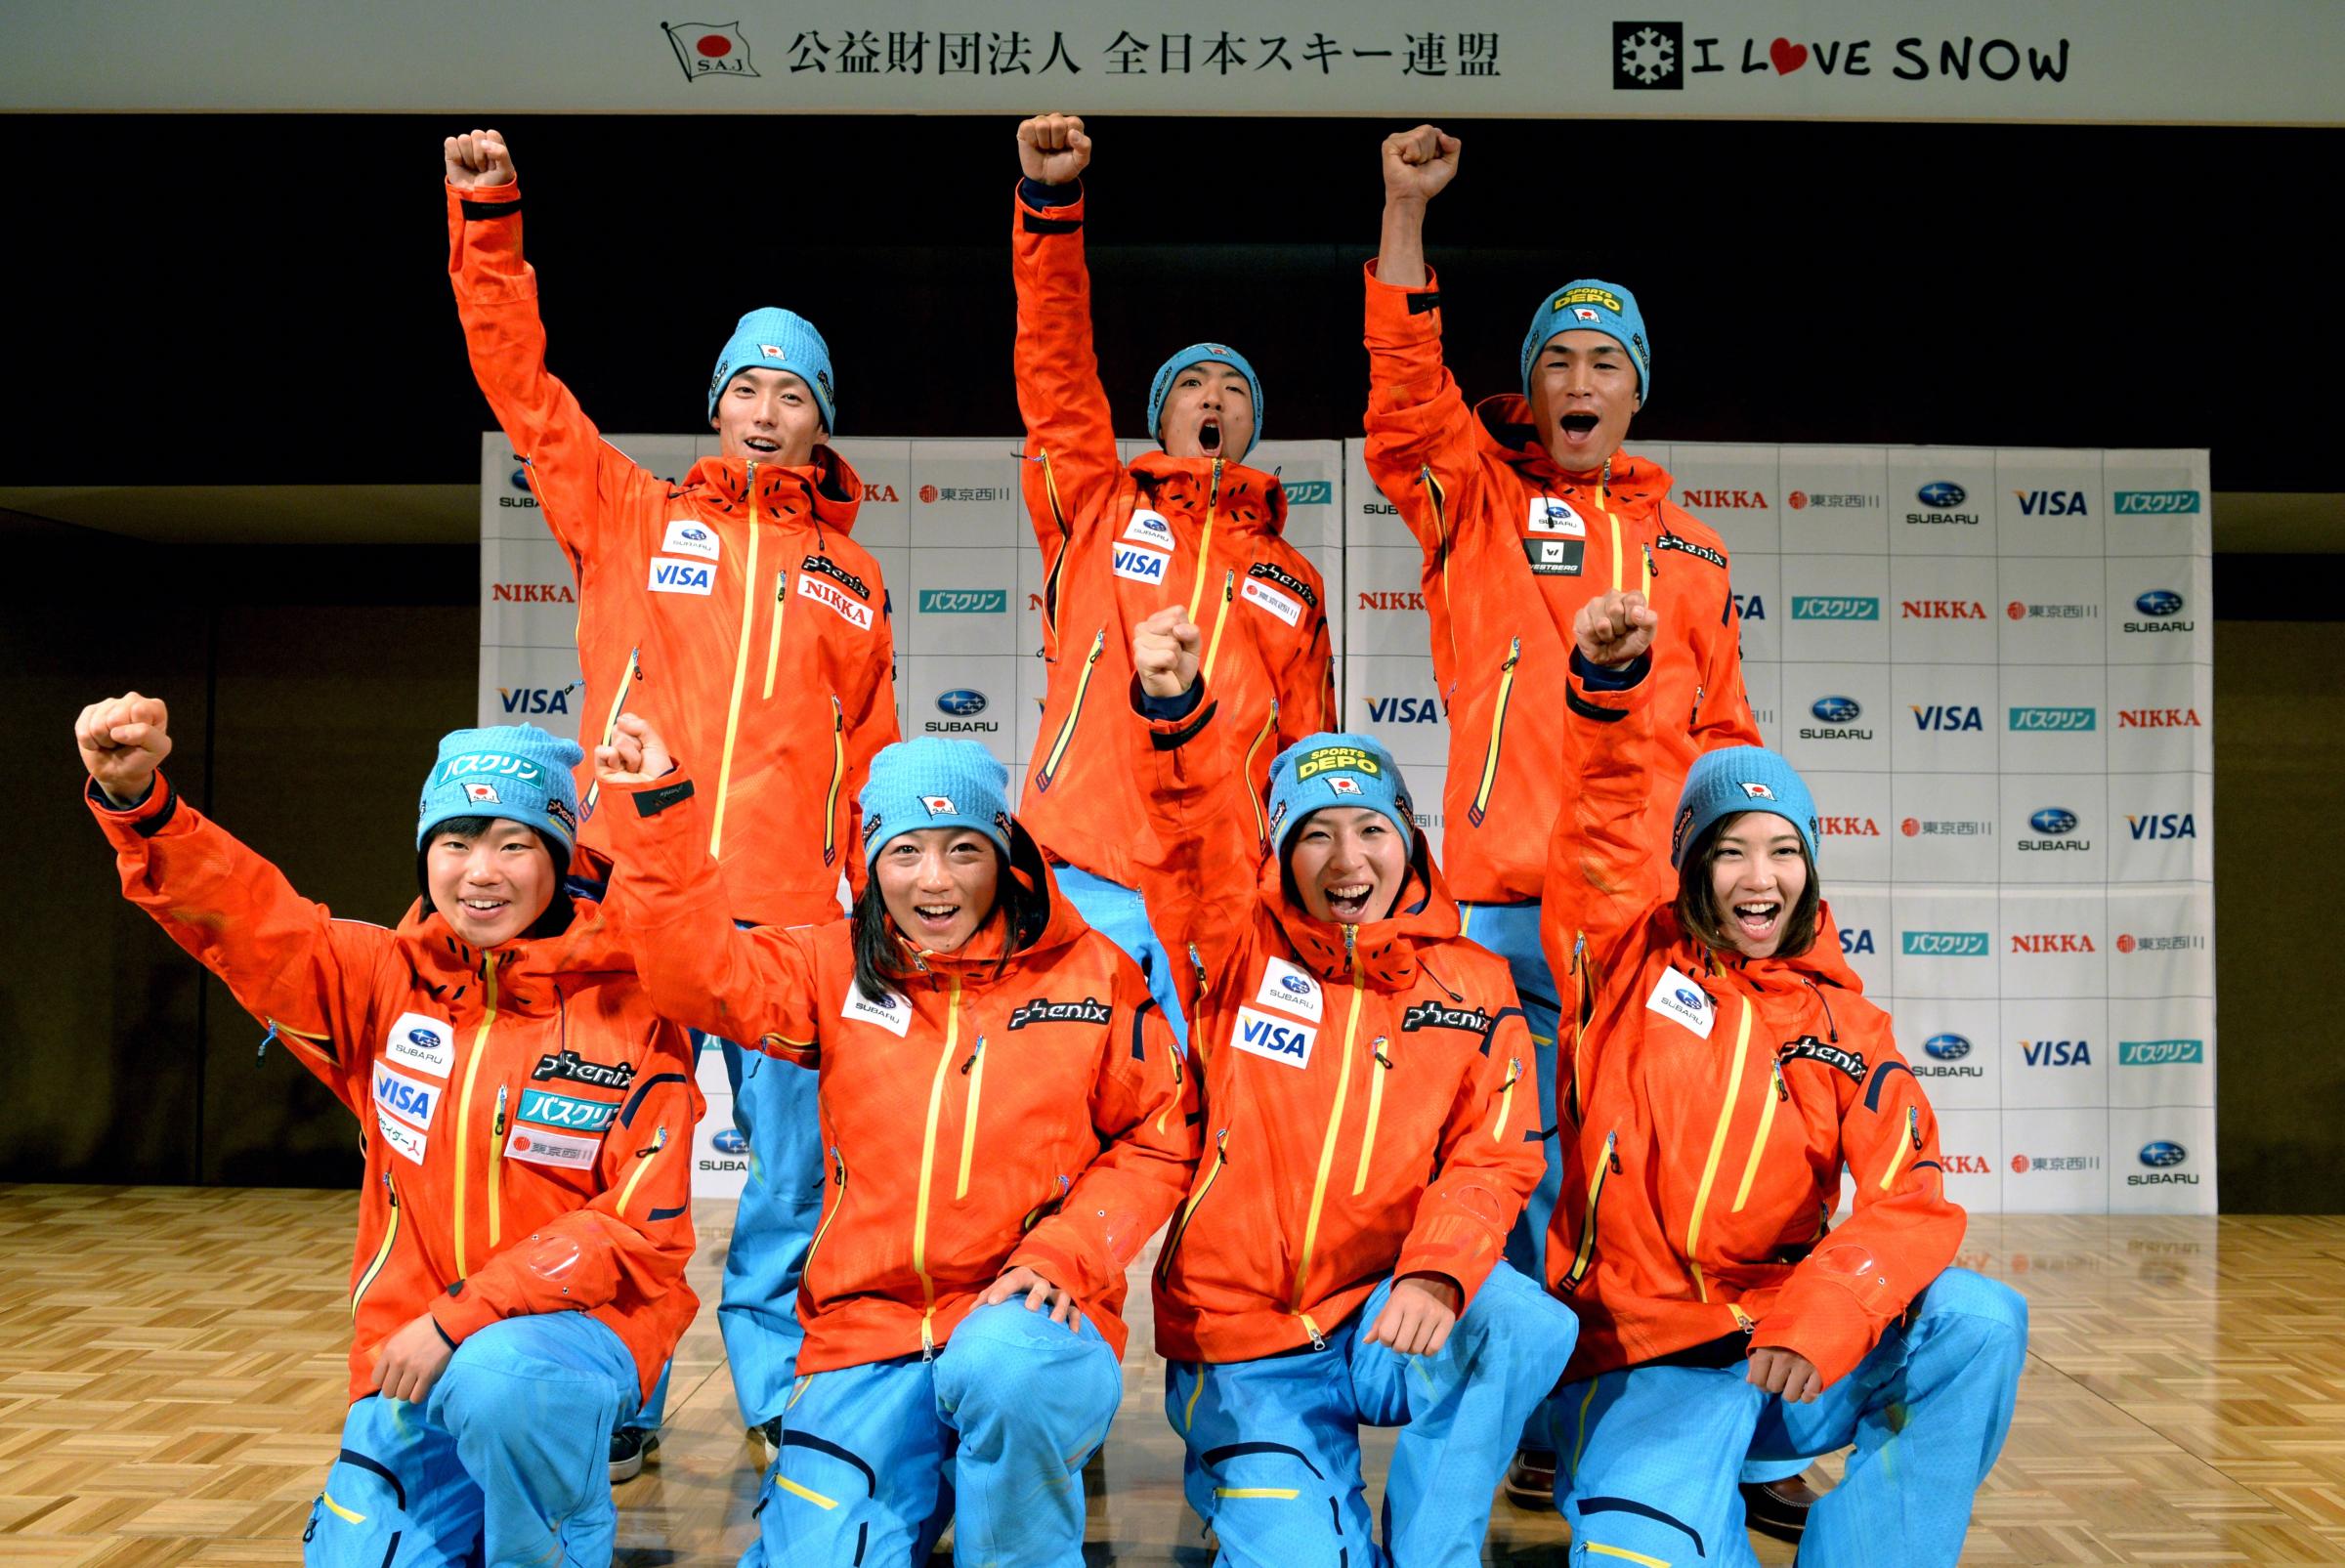 Japan's athletes are apparently pulling for Peyton Manning and the Denver Broncos.